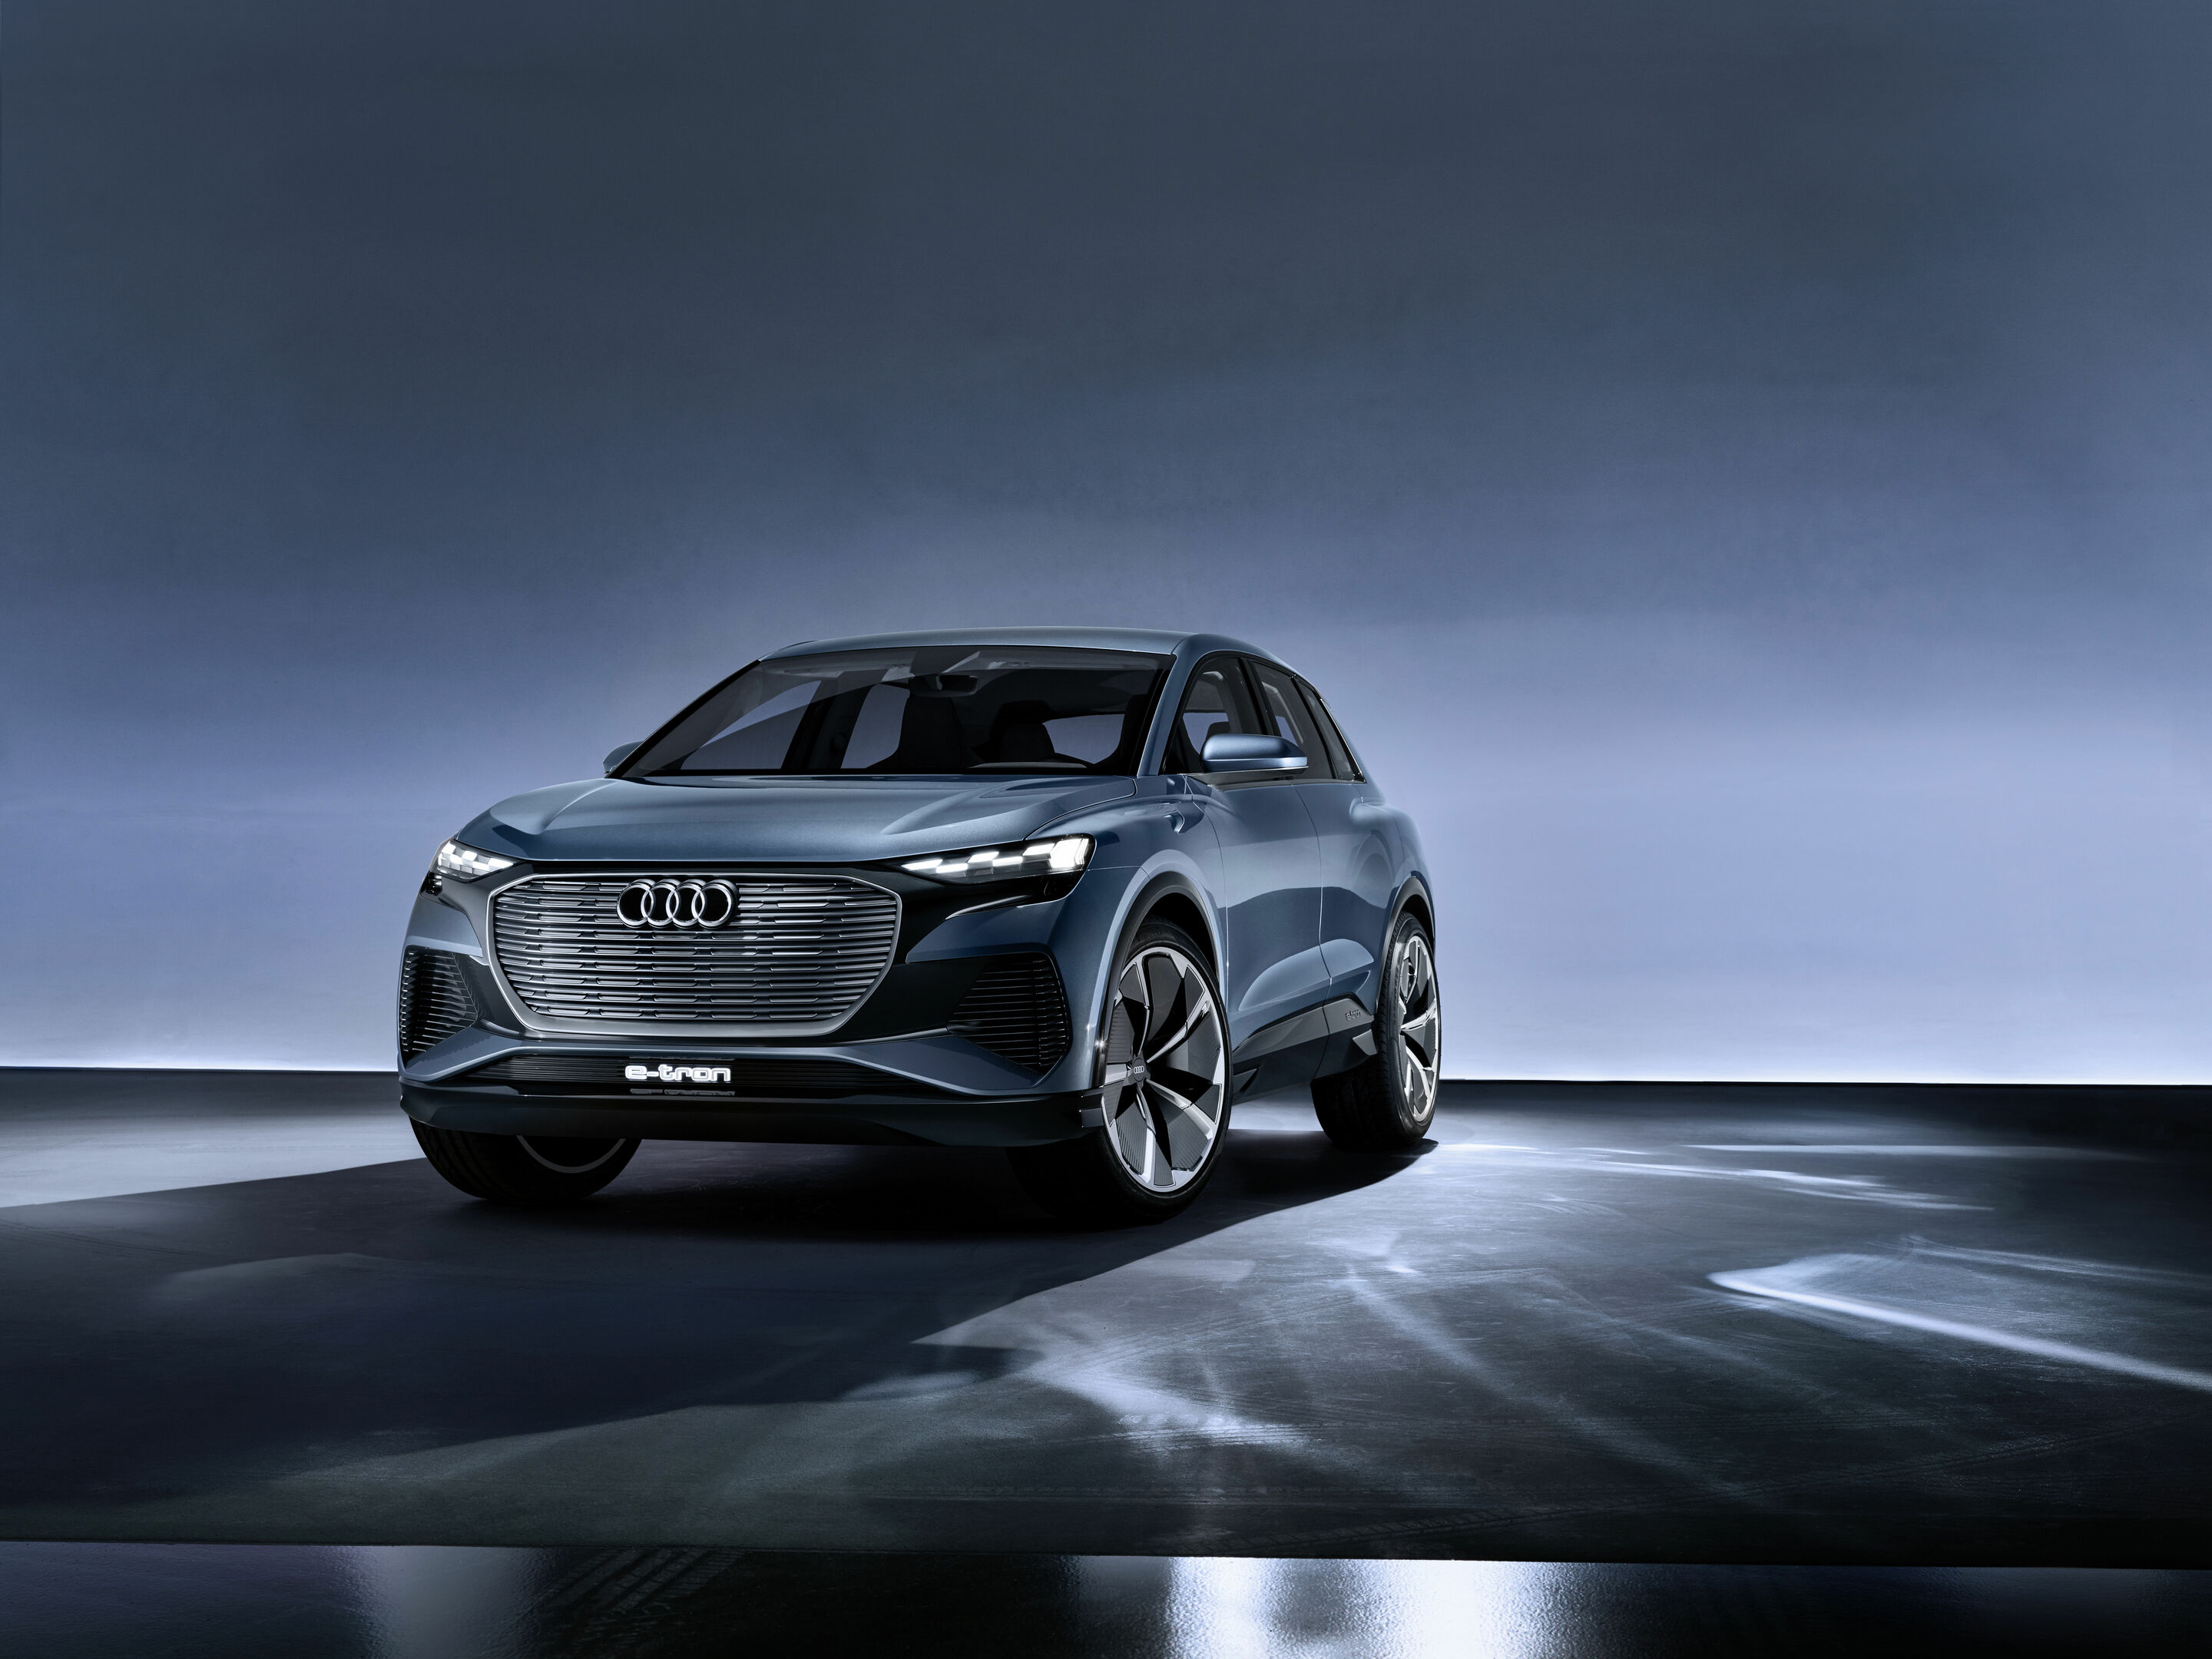 Advance Look at the Series: The Audi Q4 e-tron concept